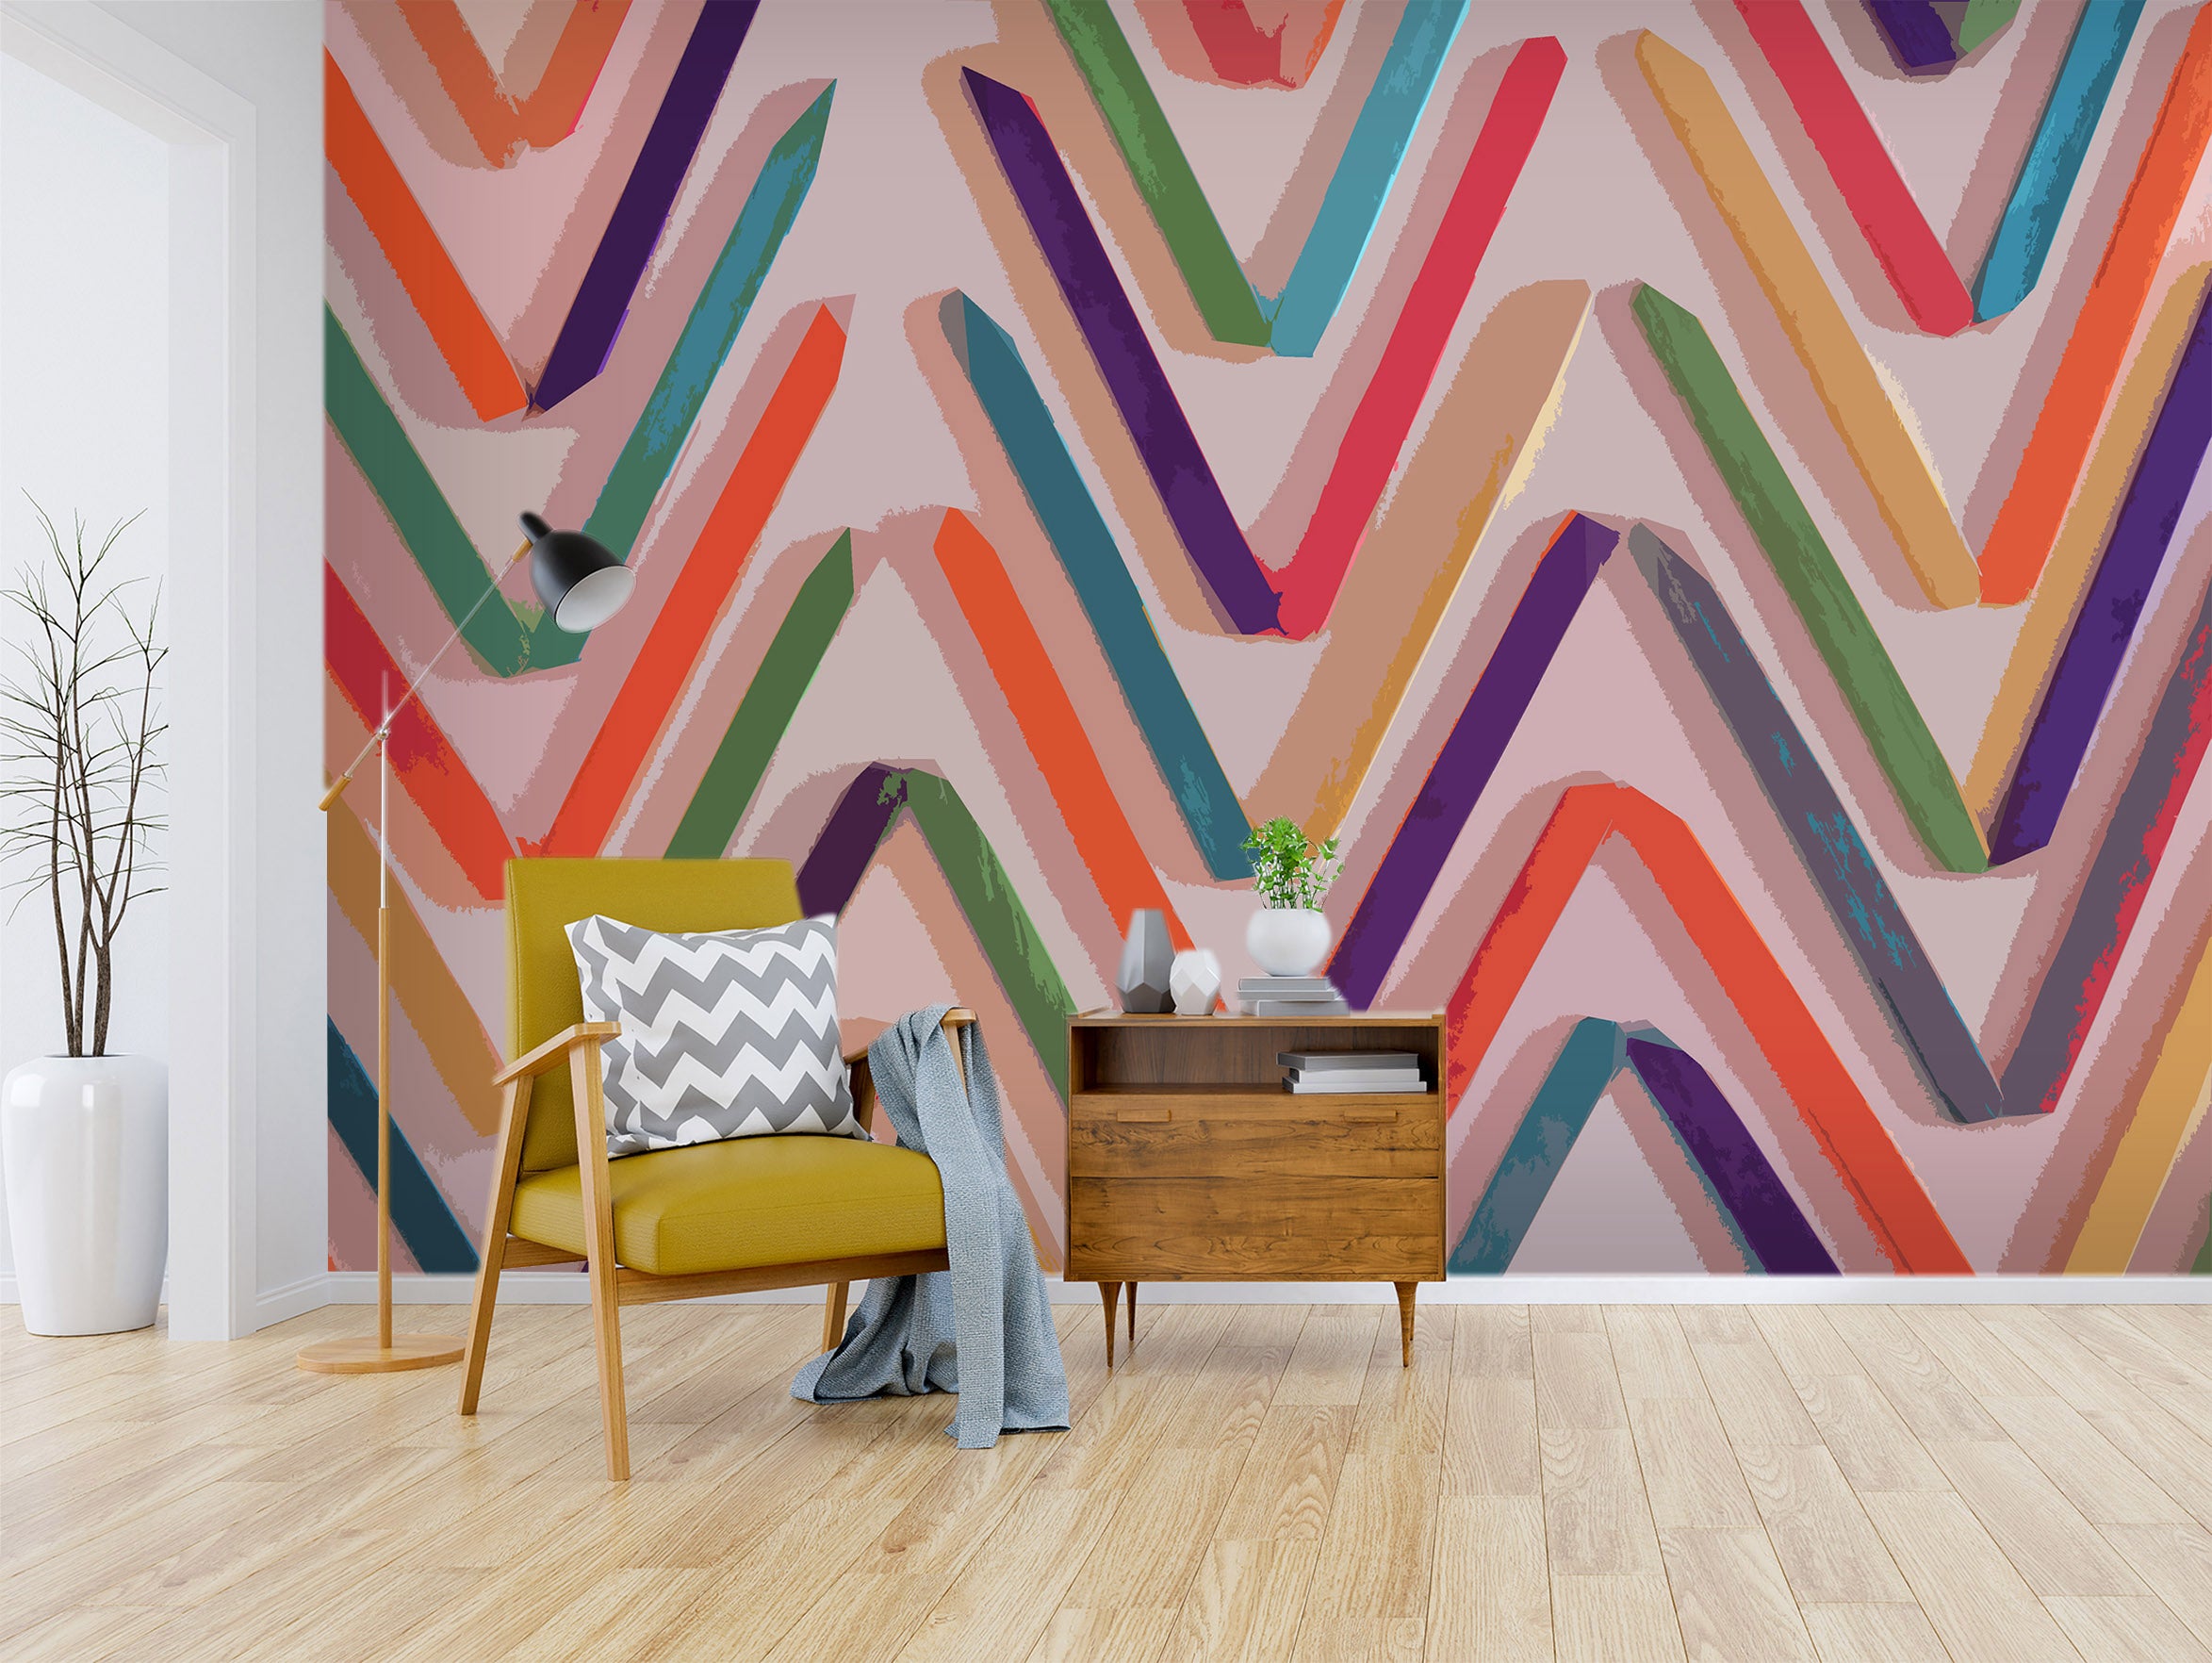 3D Colored Wavy Lines 71091 Shandra Smith Wall Mural Wall Murals